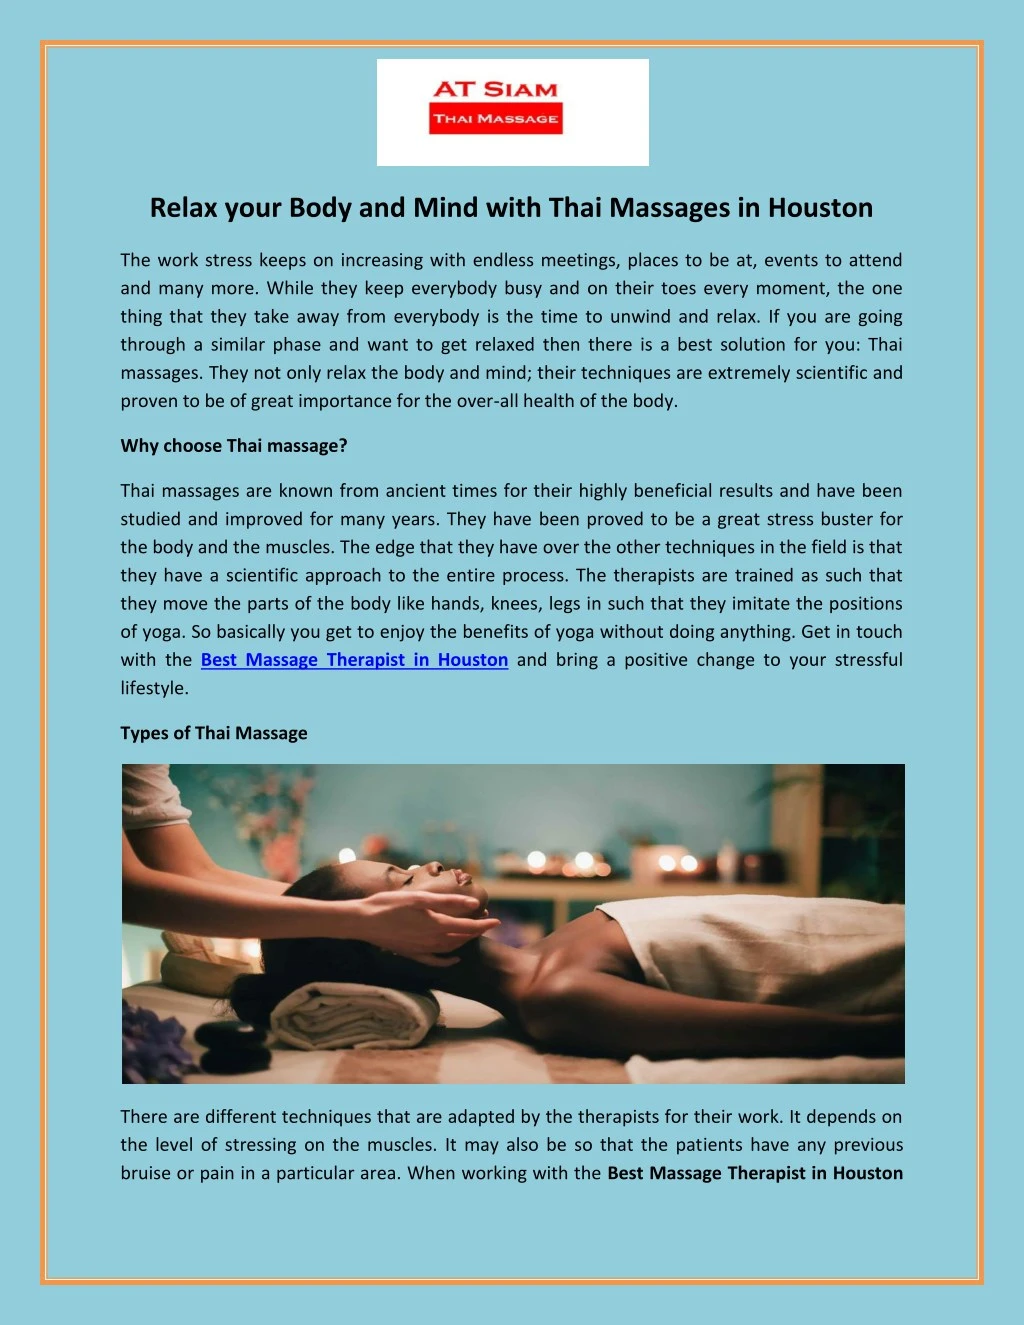 relax your body and mind with thai massages